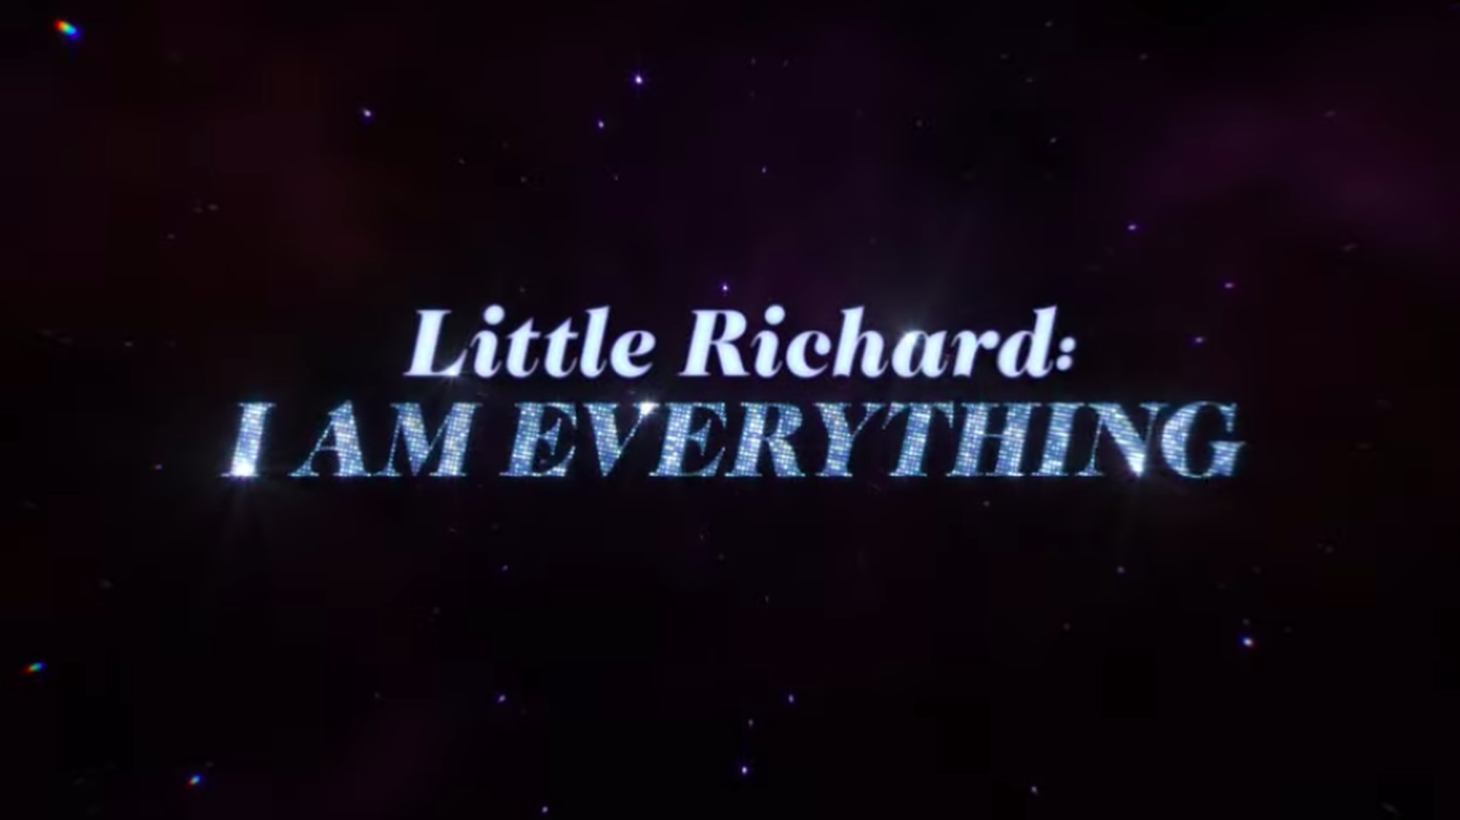 “Little Richard: I Am Everything” documents how rock and roll originated with Richard Penniman. The film features interviews with family members, musicians, and Black and queer scholars.